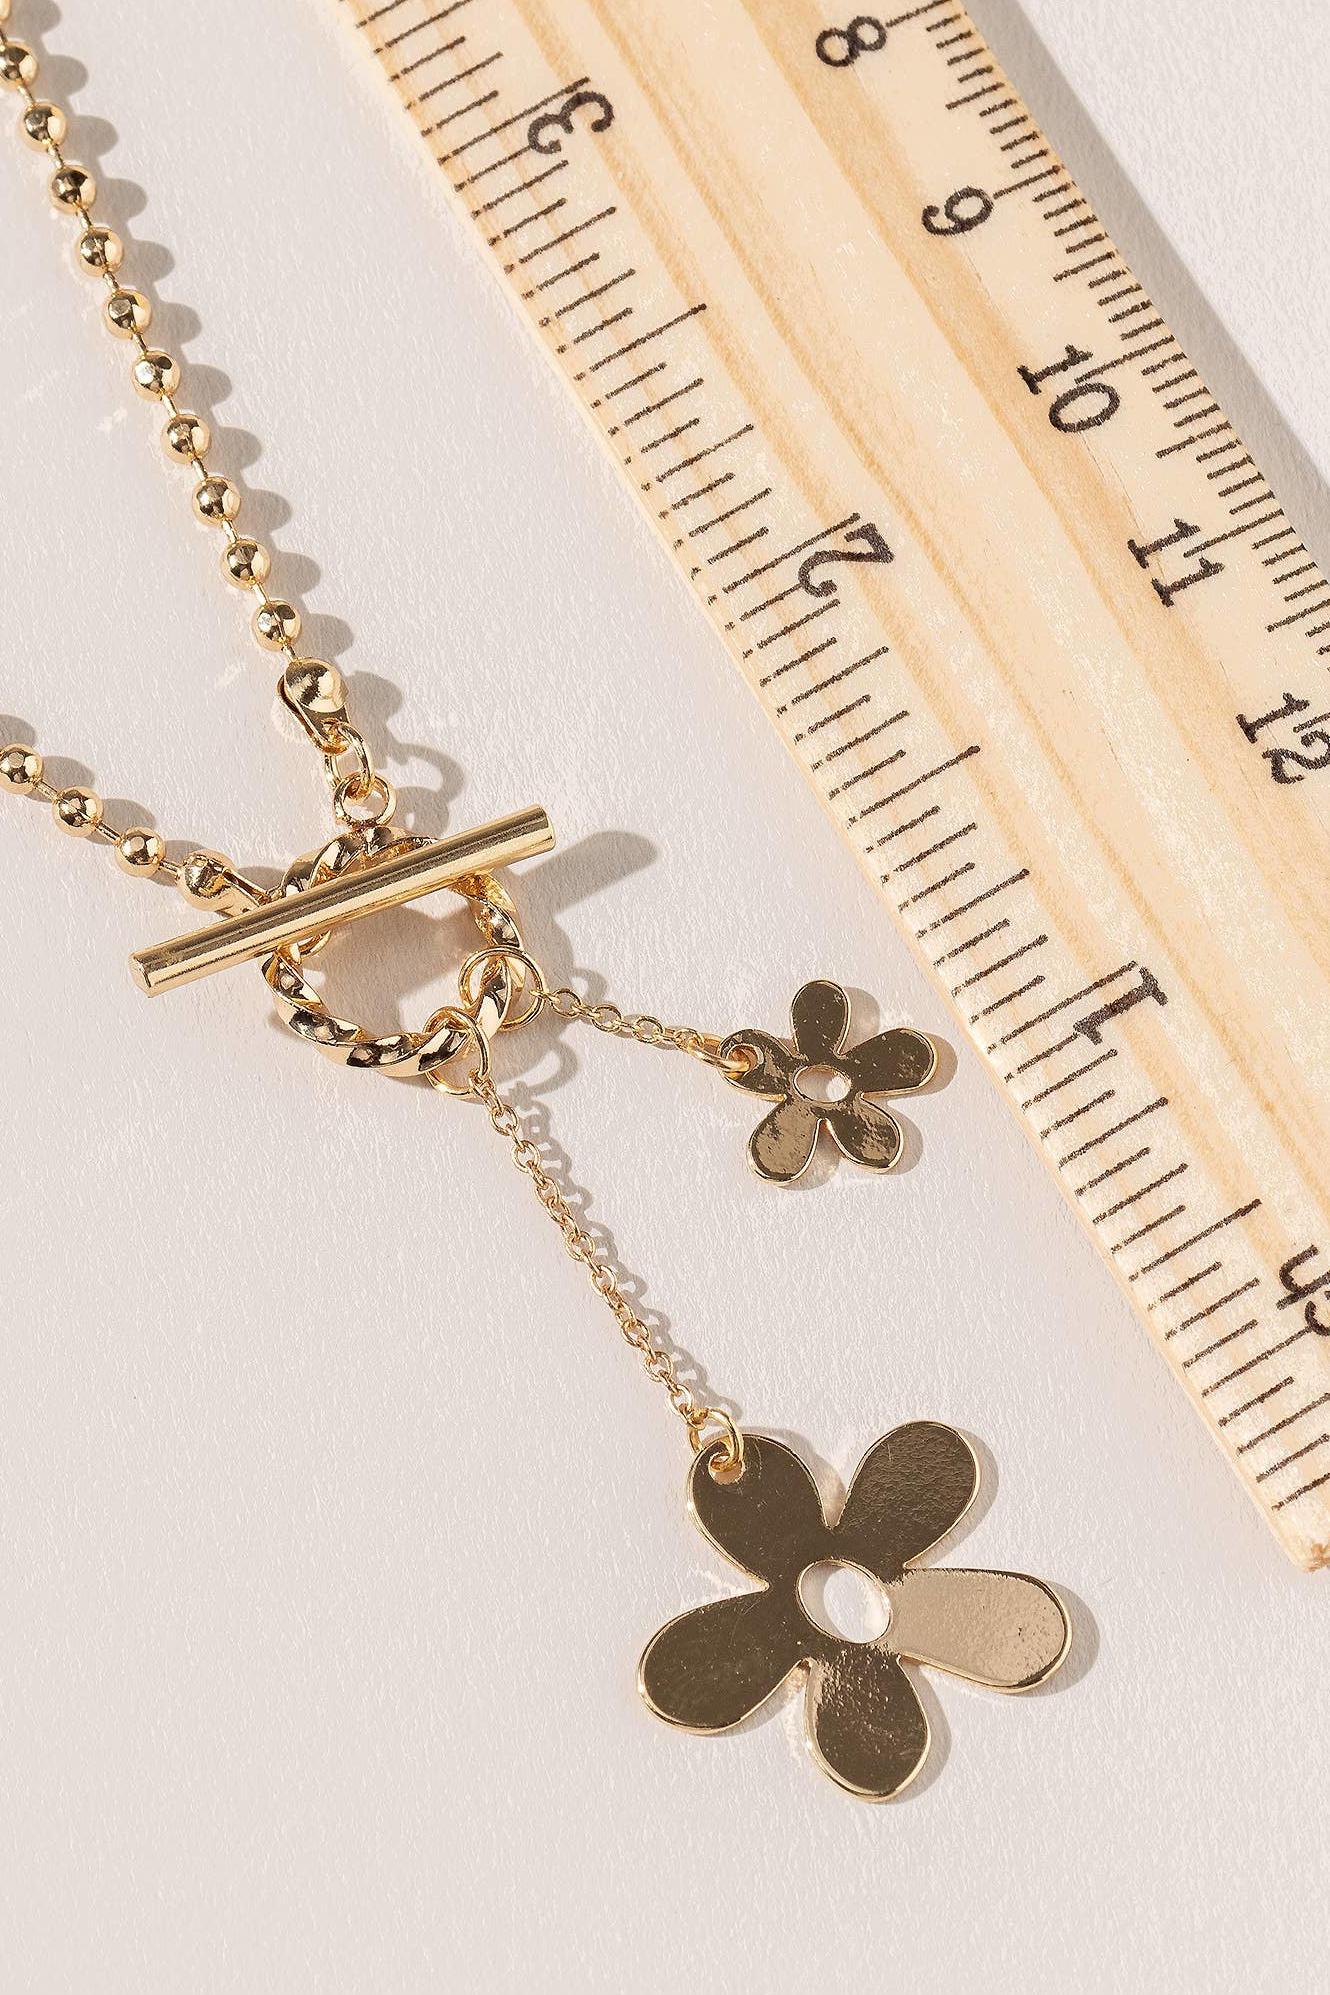 Daisy Charm Necklace - Strawberry Moon Boutique